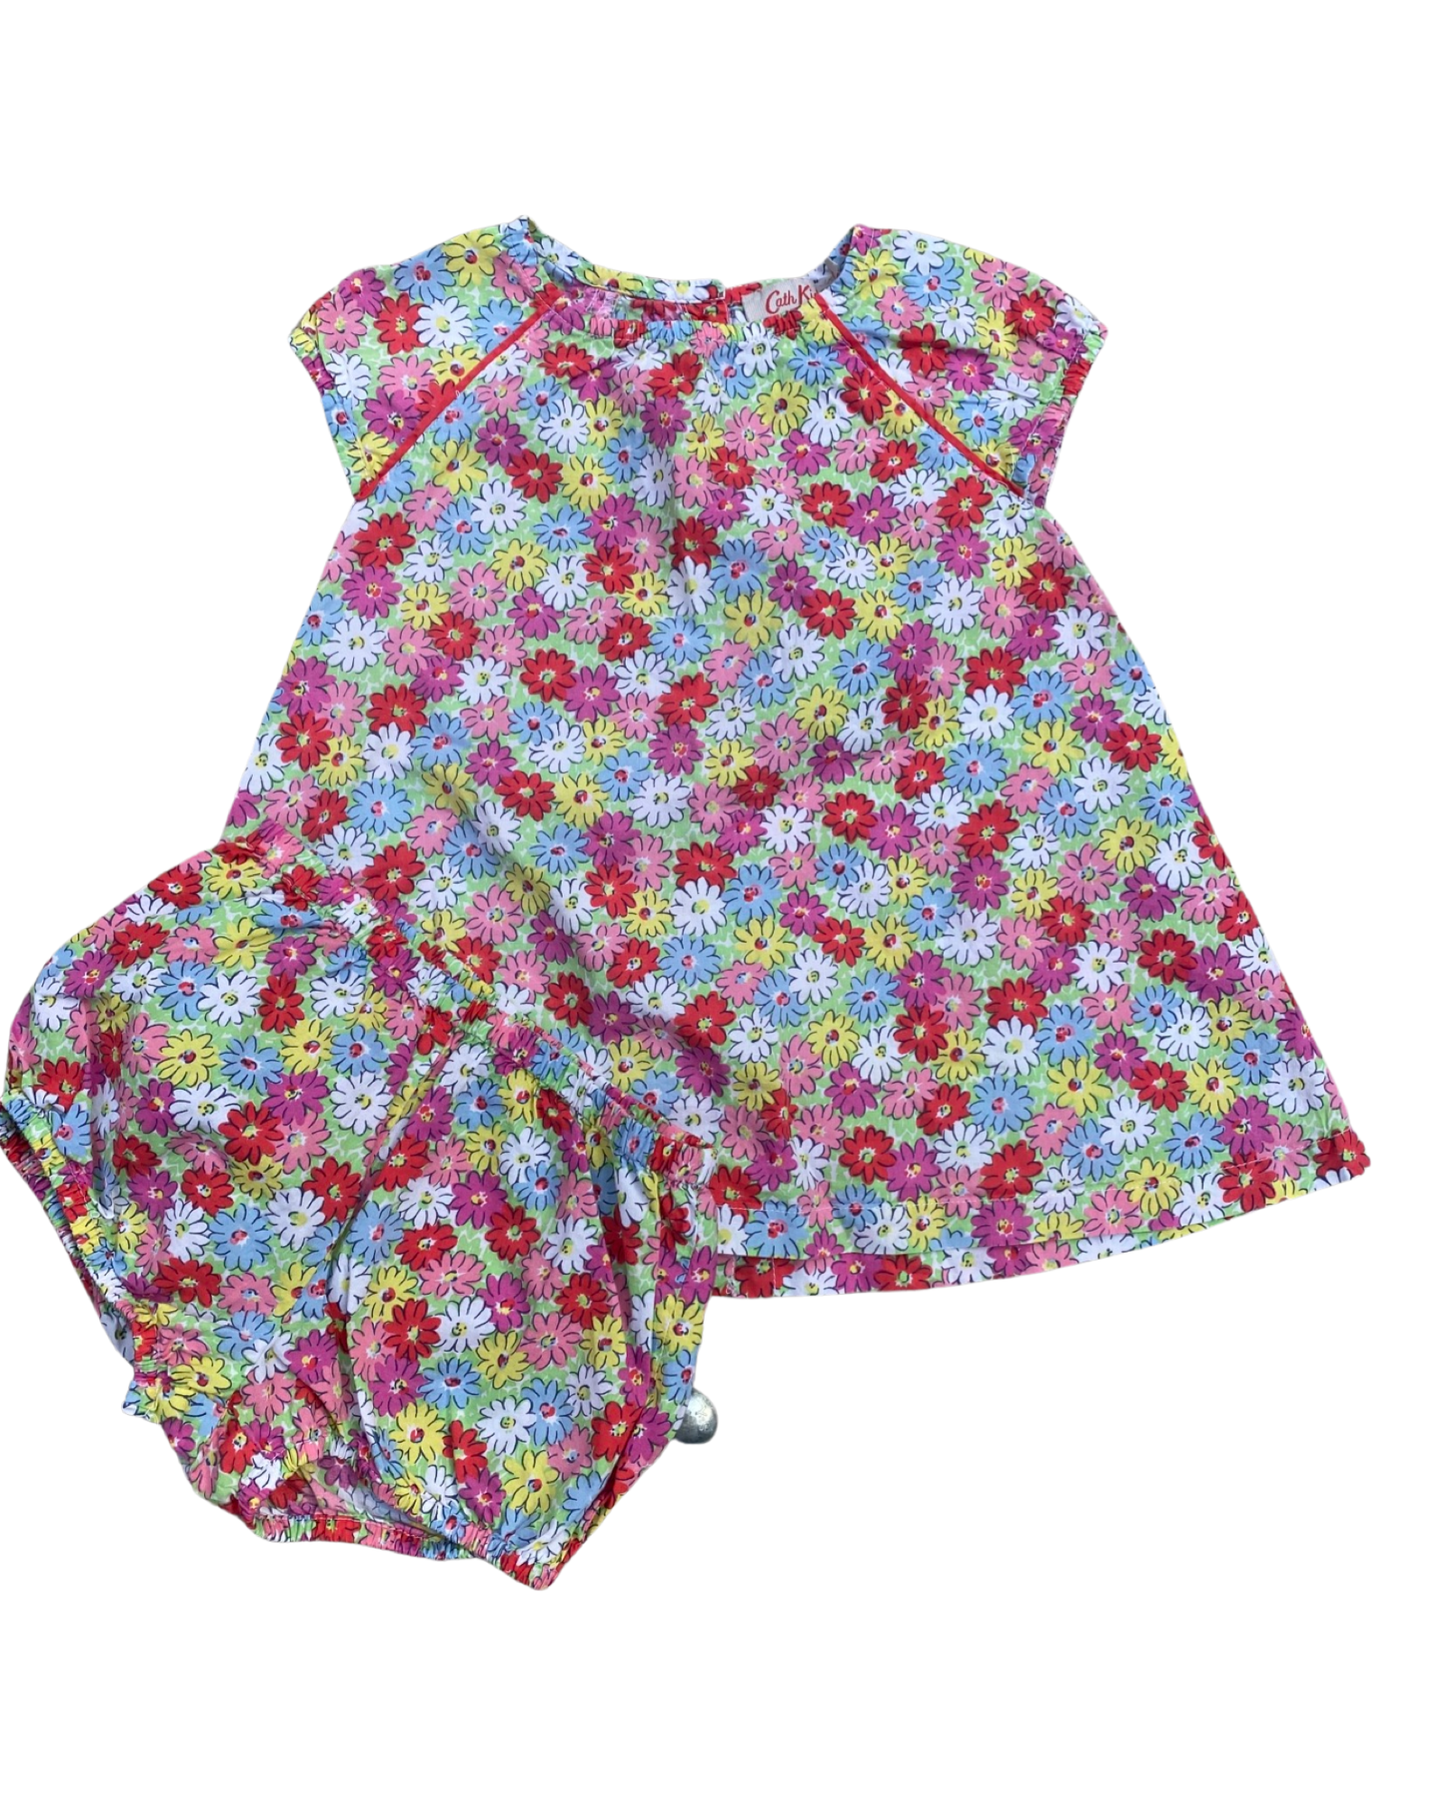 Cath Kitson floral print dress with matching nappy cover (9-12mths)